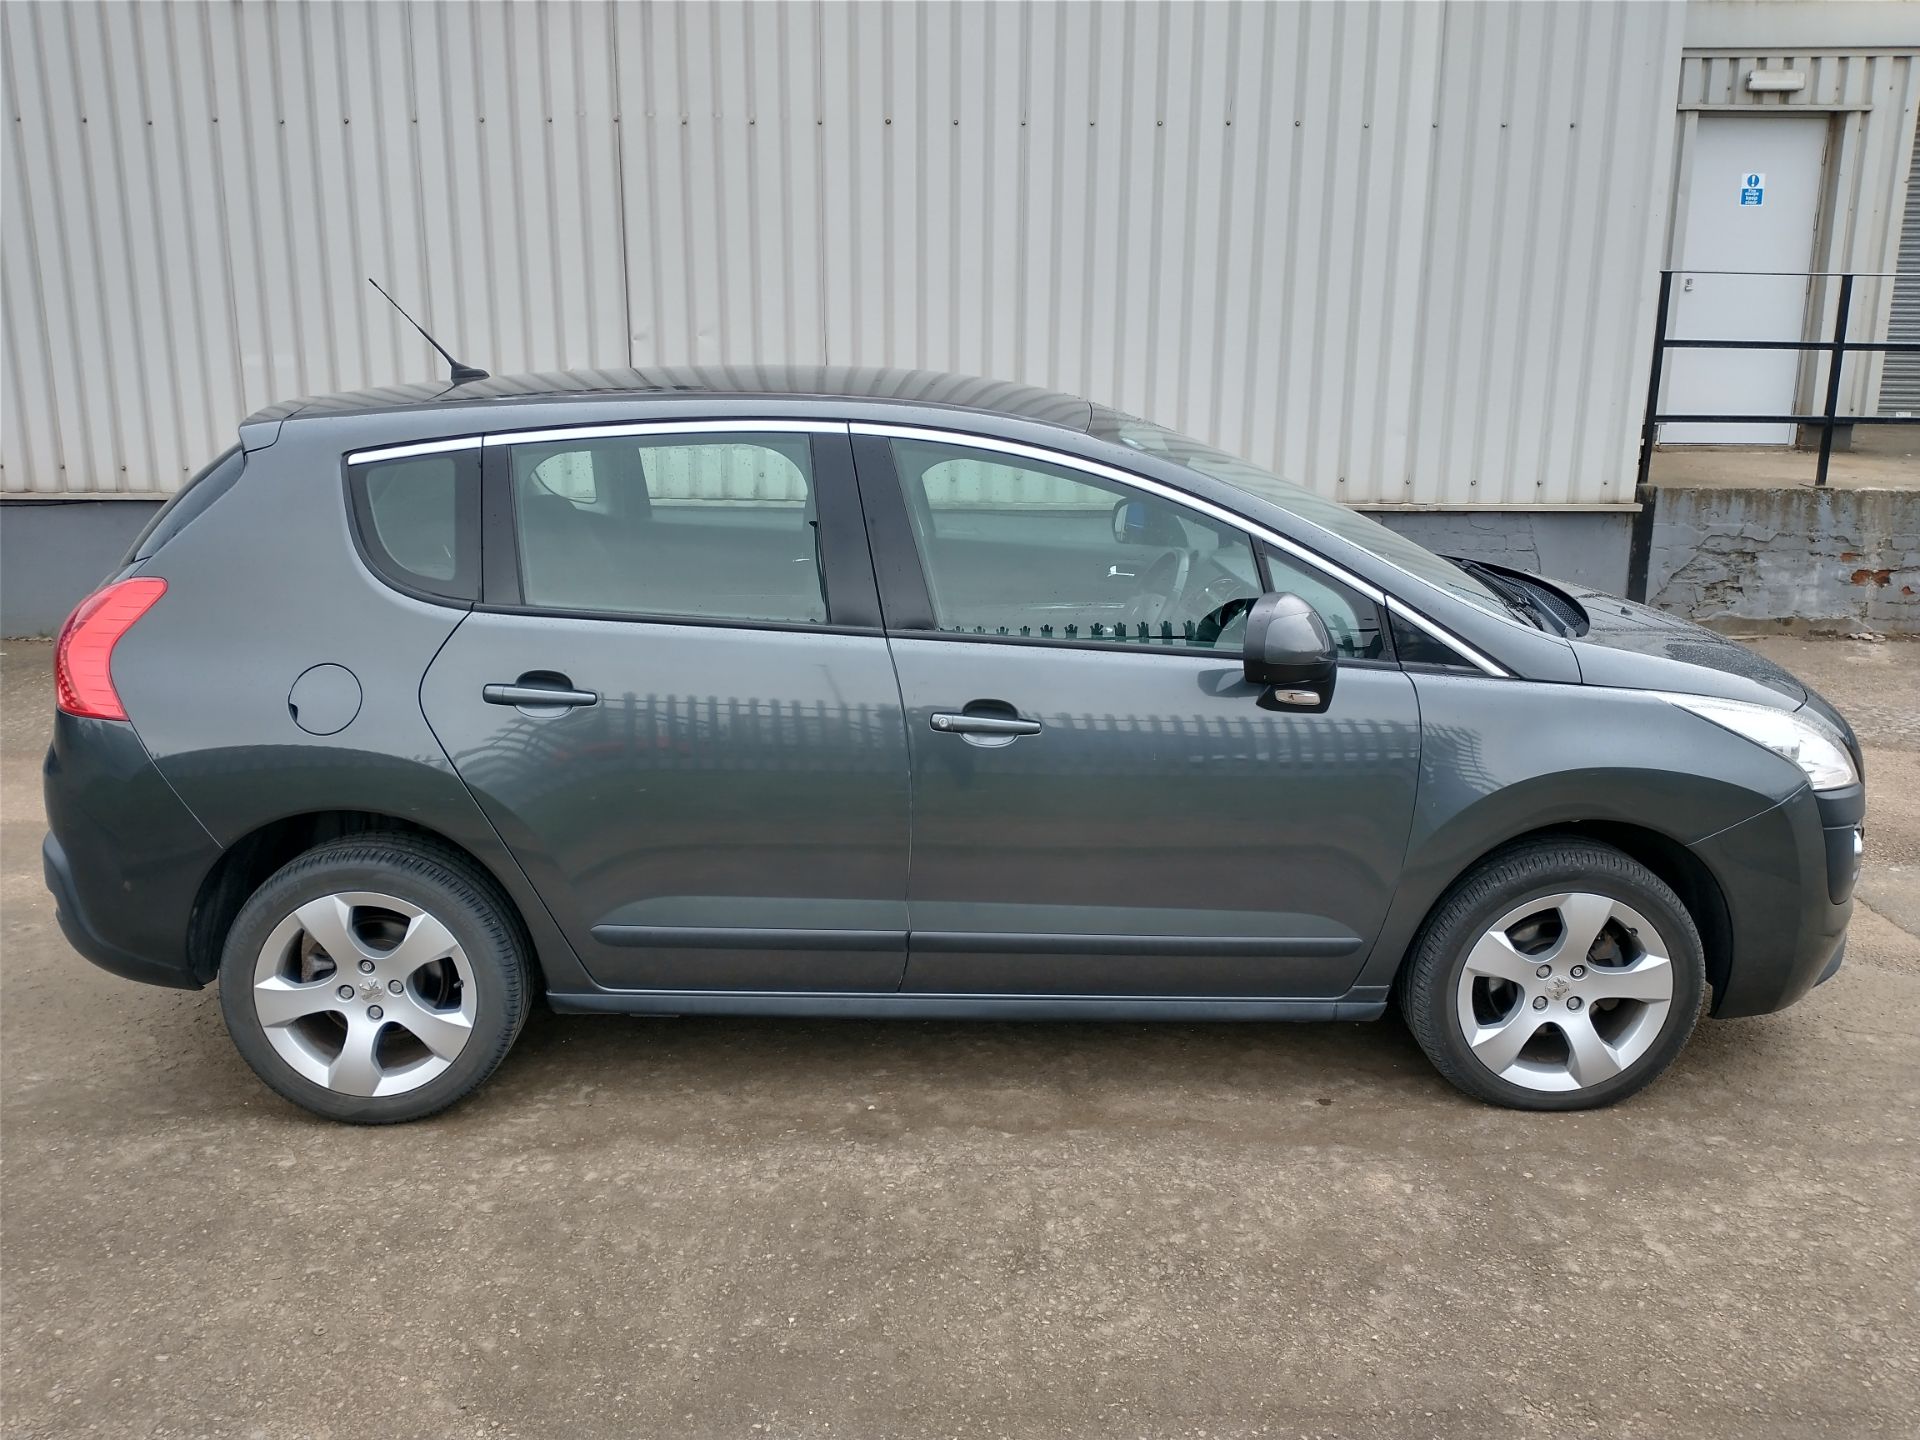 2012 Peugeot 3008 Active HDI 1.6 5DR SUV - CL505 - NO VAT ON THE HAMM - Image 4 of 19